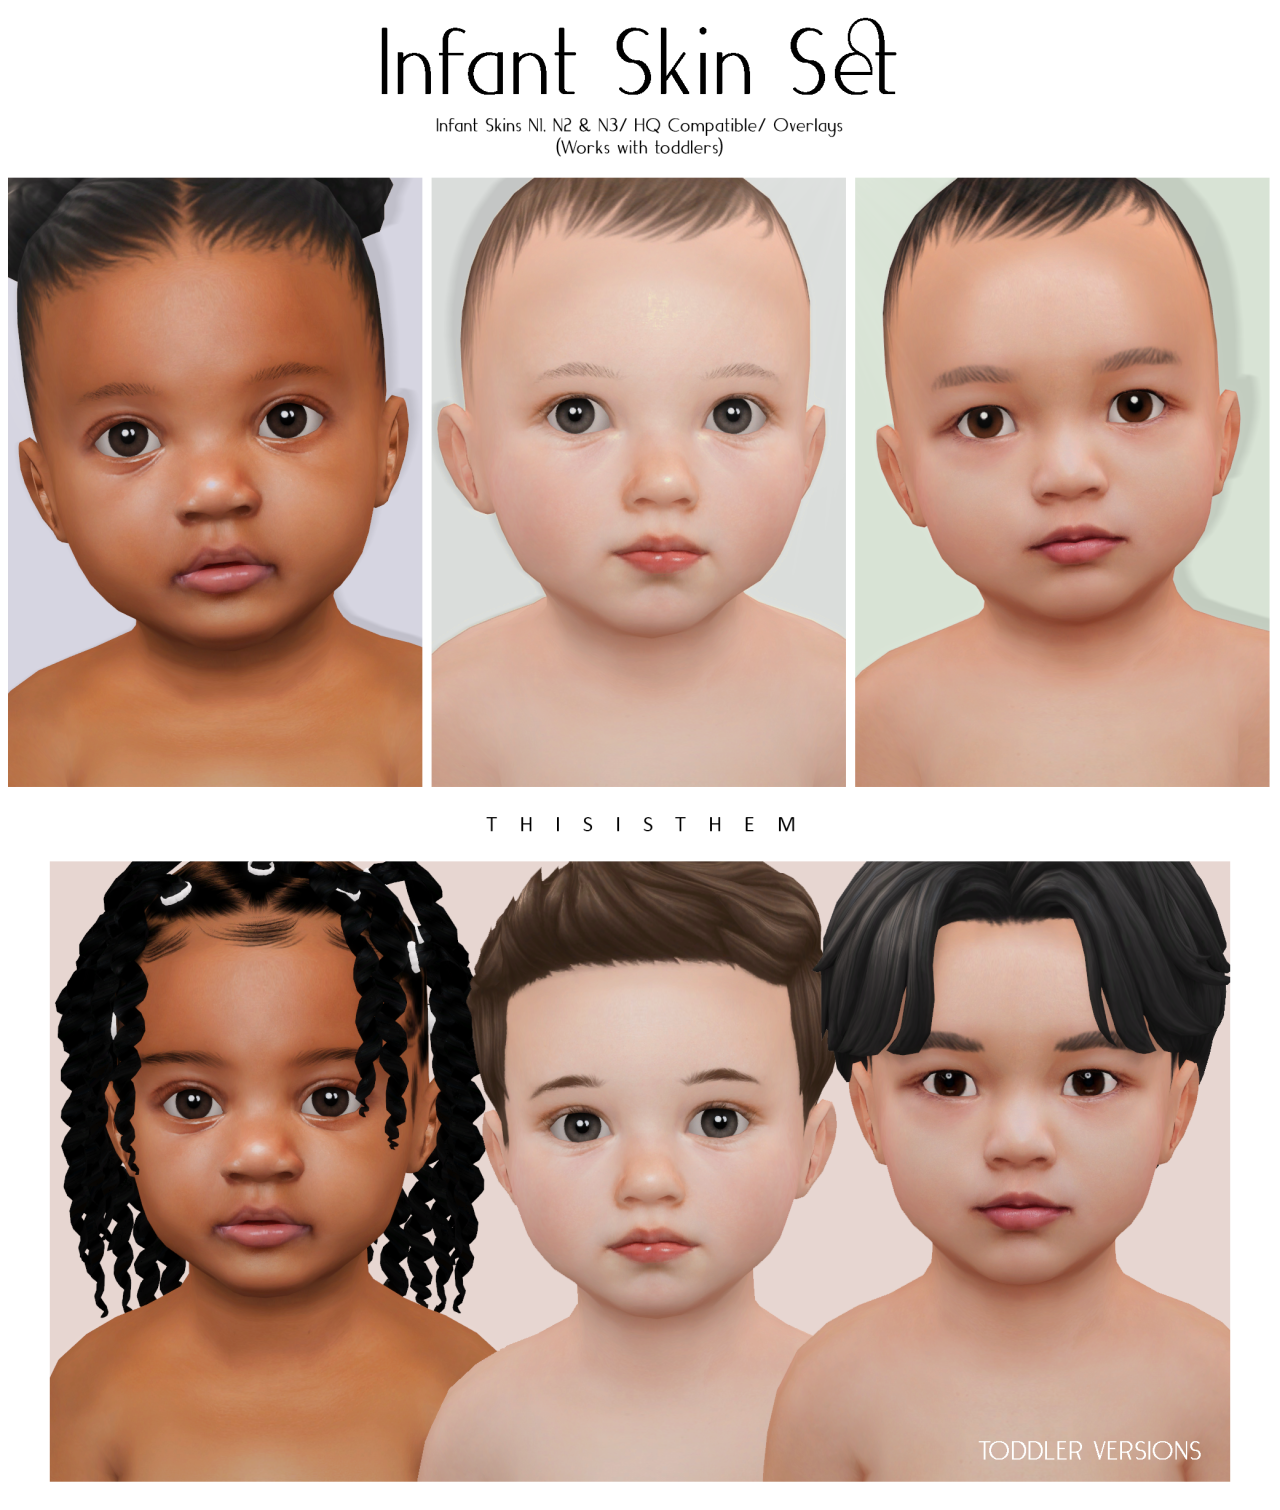 Infant Skin Set
This set includes :
• Infant Skin N1 (45 swatches/ Overlay 4 swatches) ;
• Infant Skin N2 (35 swatches/ Overlay 3 swatches) ;
• Infant Skin N3 (35 swatches/ Overlay 3 swatches) ;
• HQ Compatible ;
• Work with toddlers ;
• Custom...